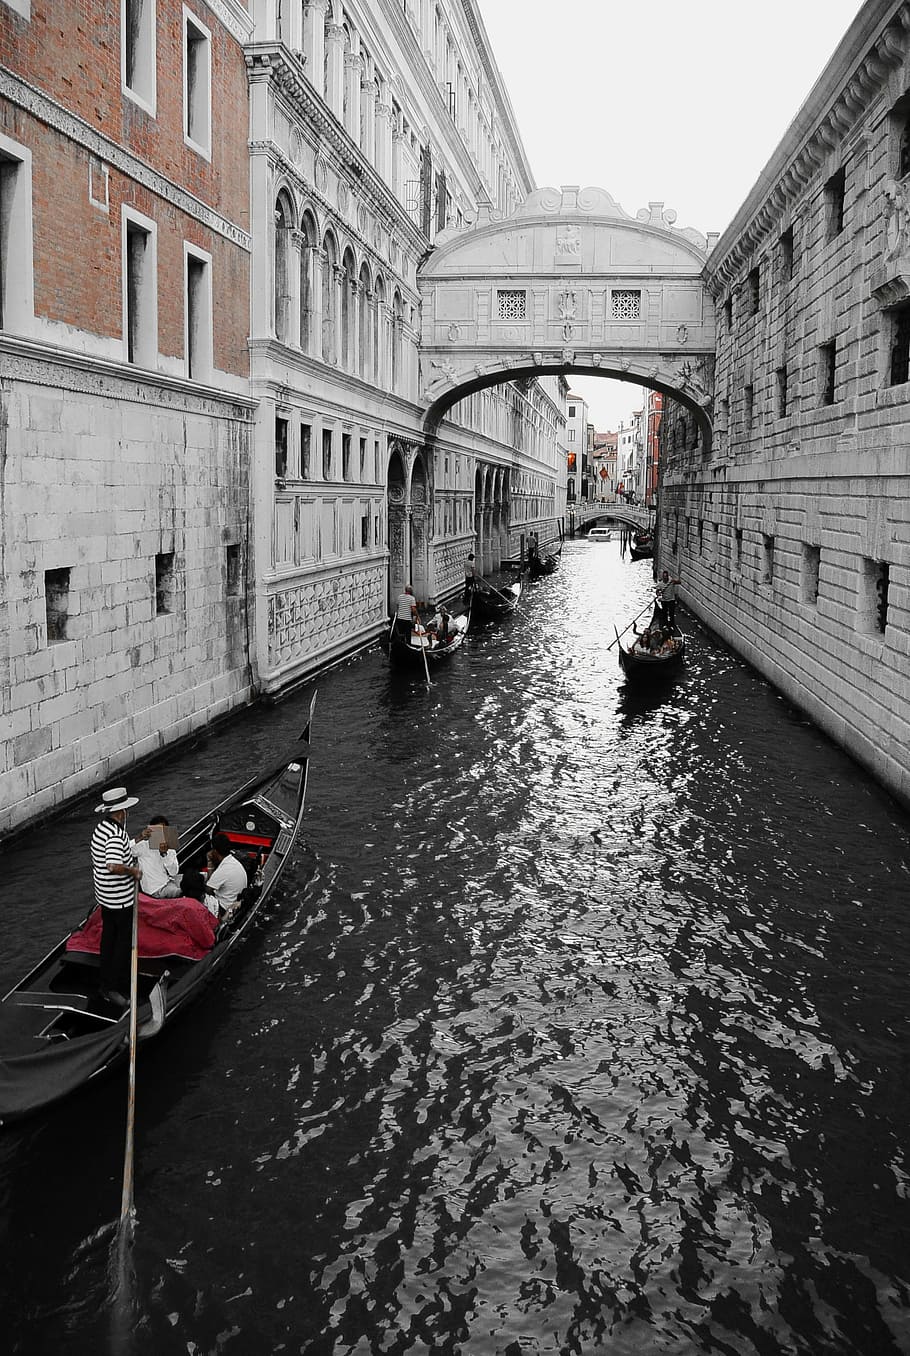 Venice, Italy, Bridge Of Sighs, Gondolas, venice, italy, channel, boot, secondary channel, water, romantic